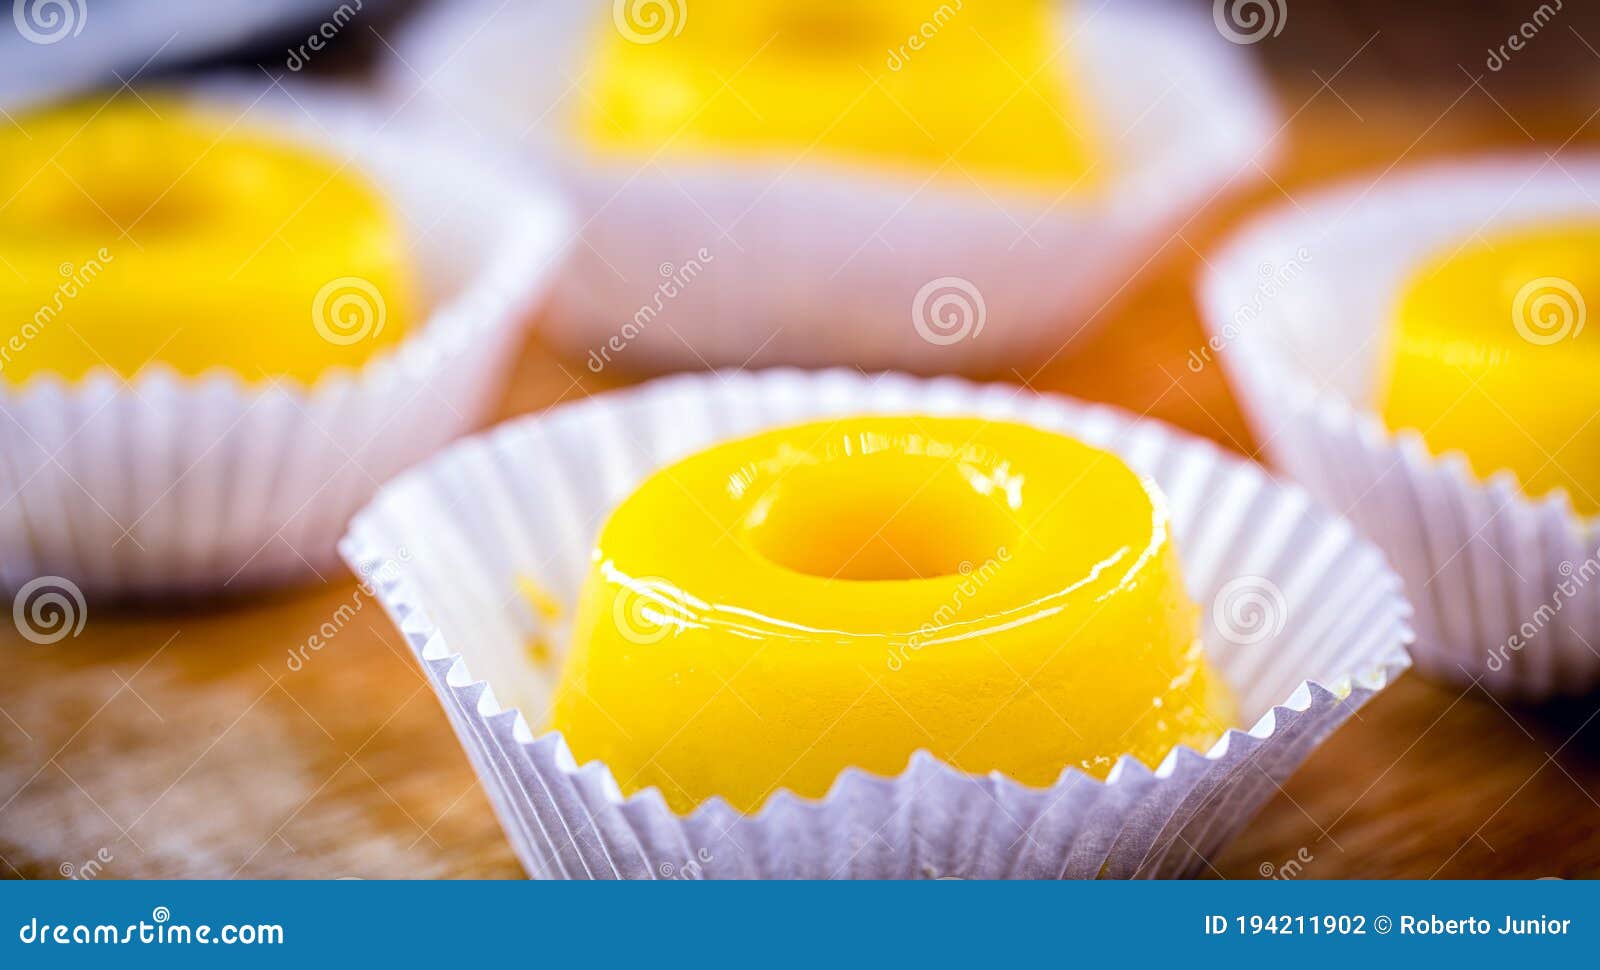 egg yolk candy, called quindim in brazil, and portugal in brisa-do-lis. sweet dessert on rustic wooden background